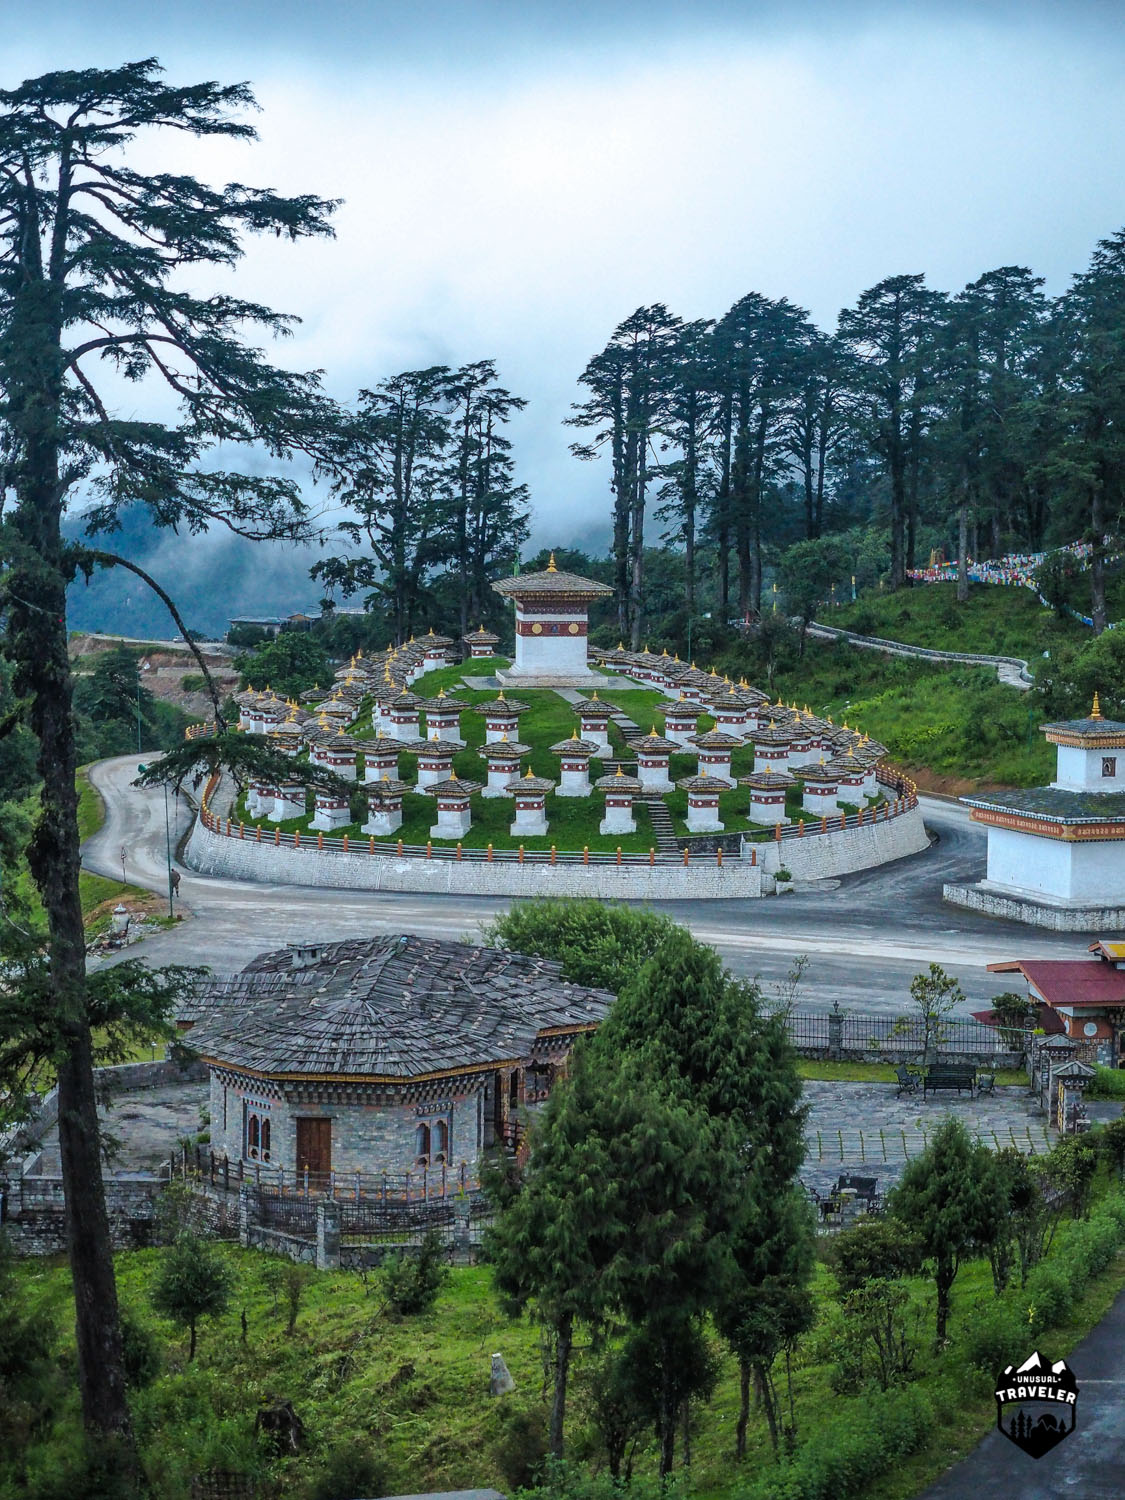 The 108 Stompas as seen from the Druk Wangyal Lhakhang temple in Bhutan